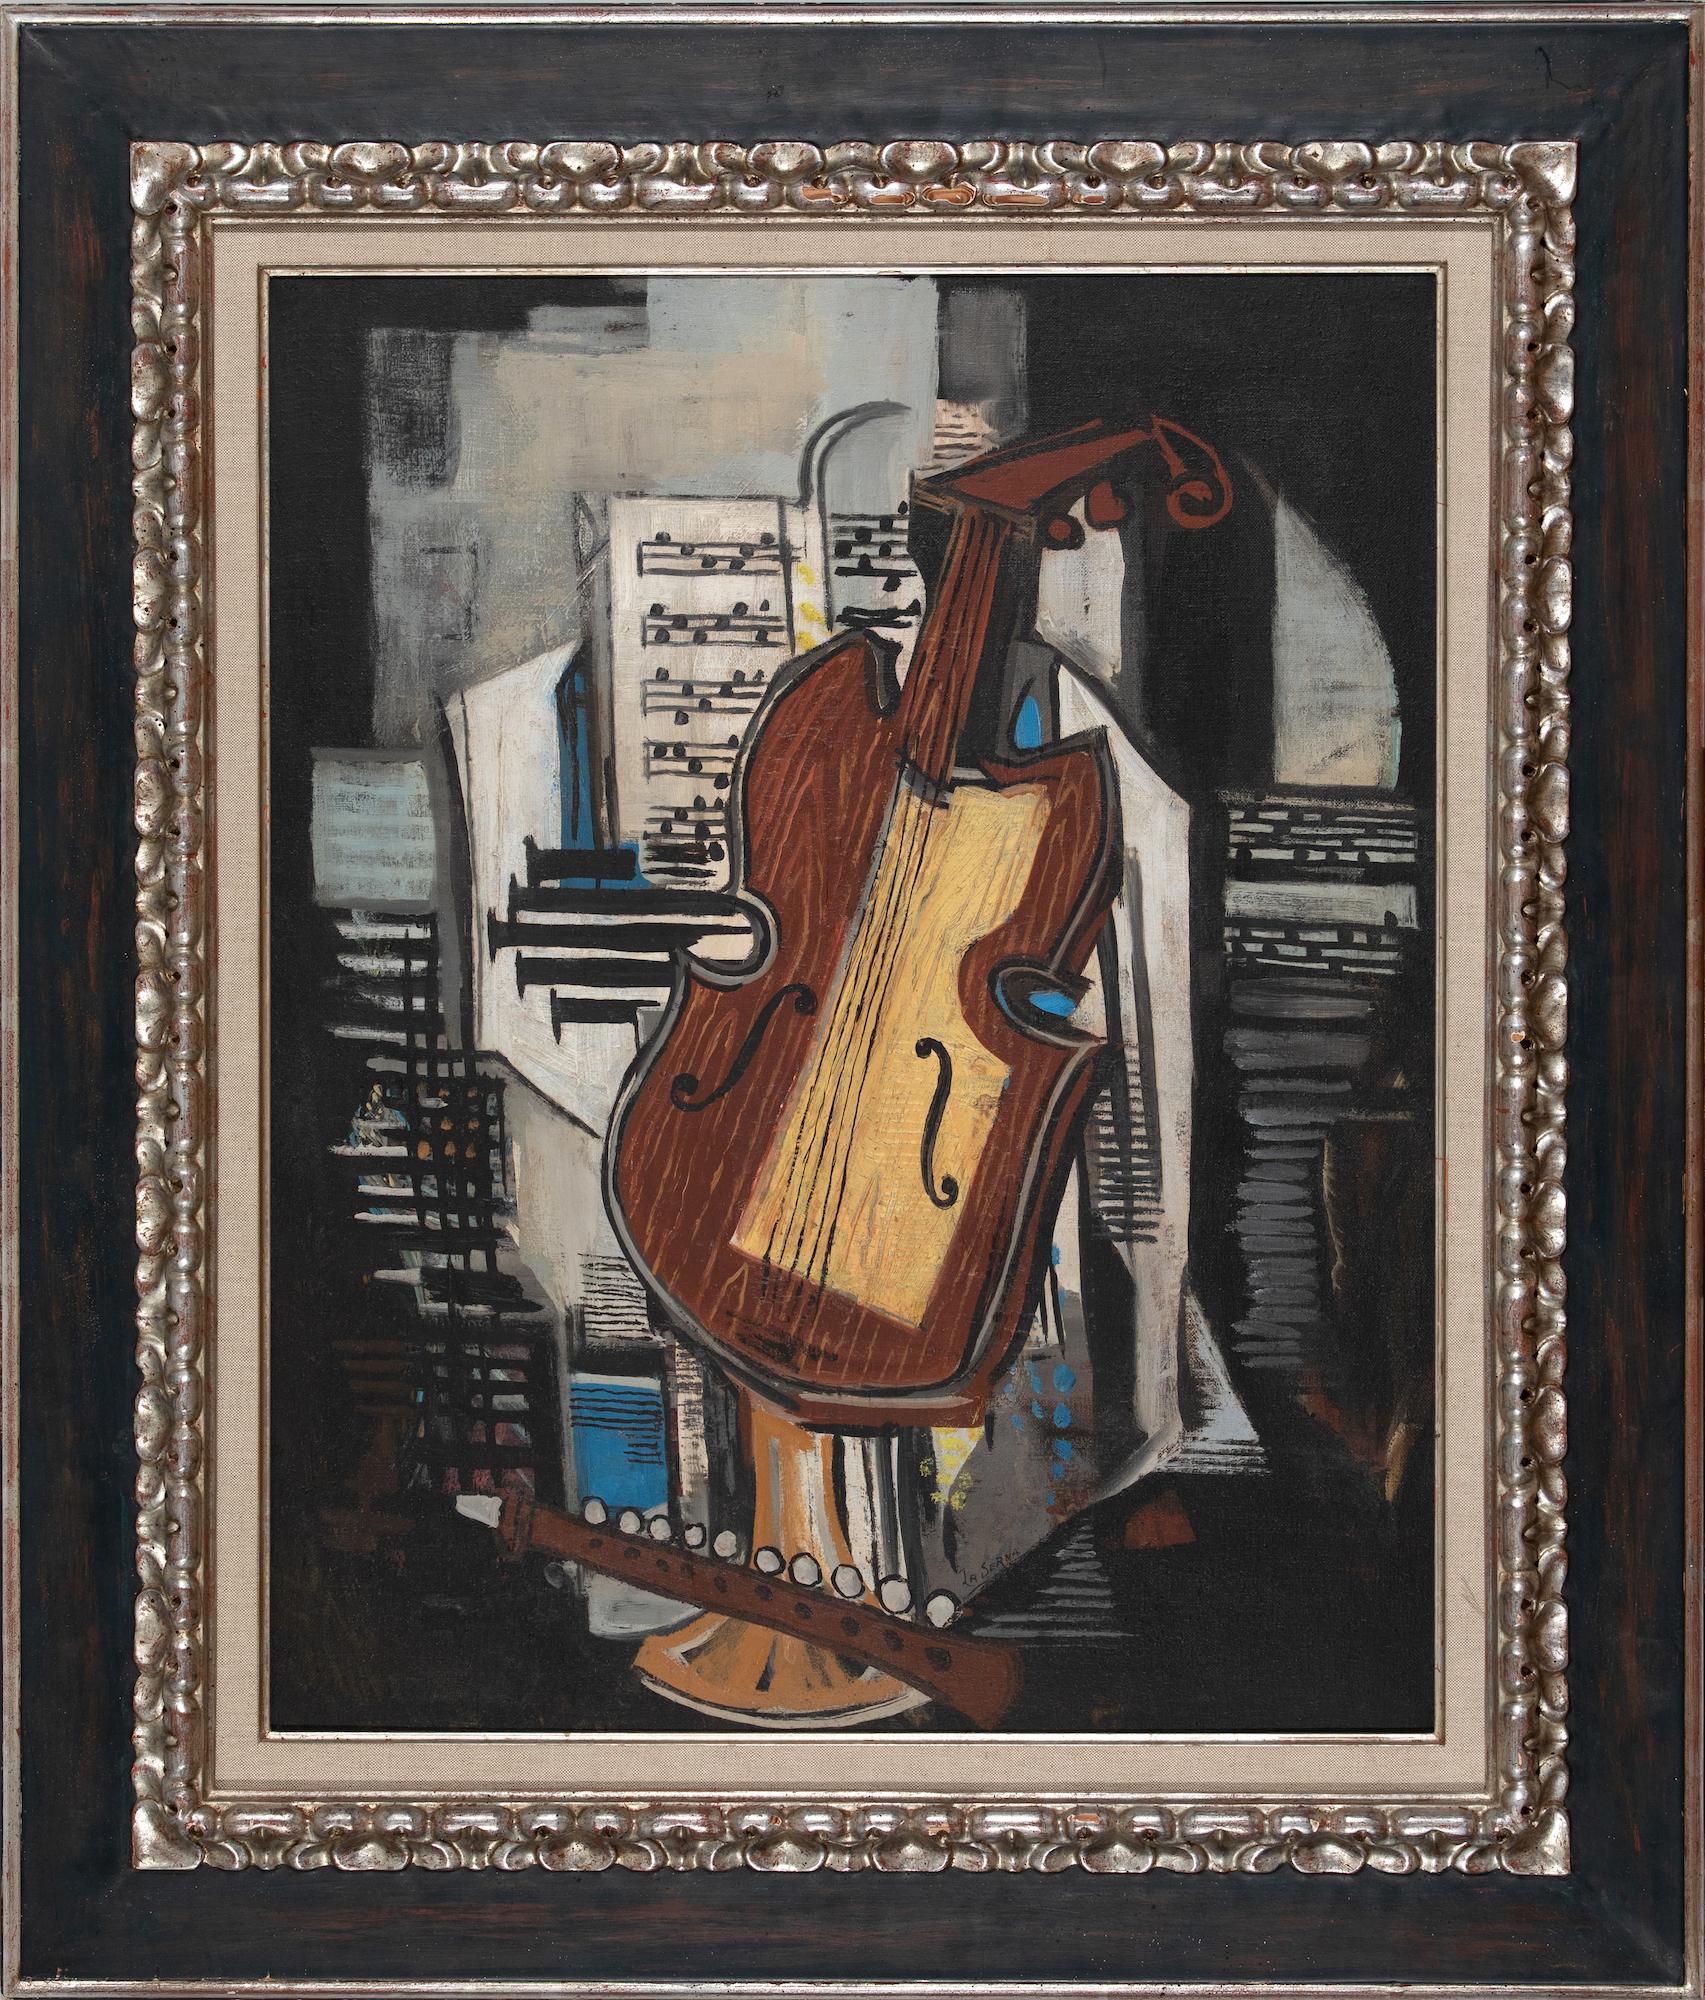 *UK BUYERS WILL PAY AN ADDITIONAL 20% VAT ON TOP OF THE ABOVE PRICE

Still Life with Violin	by Ismael de la Serna (1898-1968)
Oil on canvas
81 x 65 cm (31 ⁷/₈ x 25 ⁵/₈ inches)
Signed lower centre, La Serna
Executed circa 1930

Provenance: Private